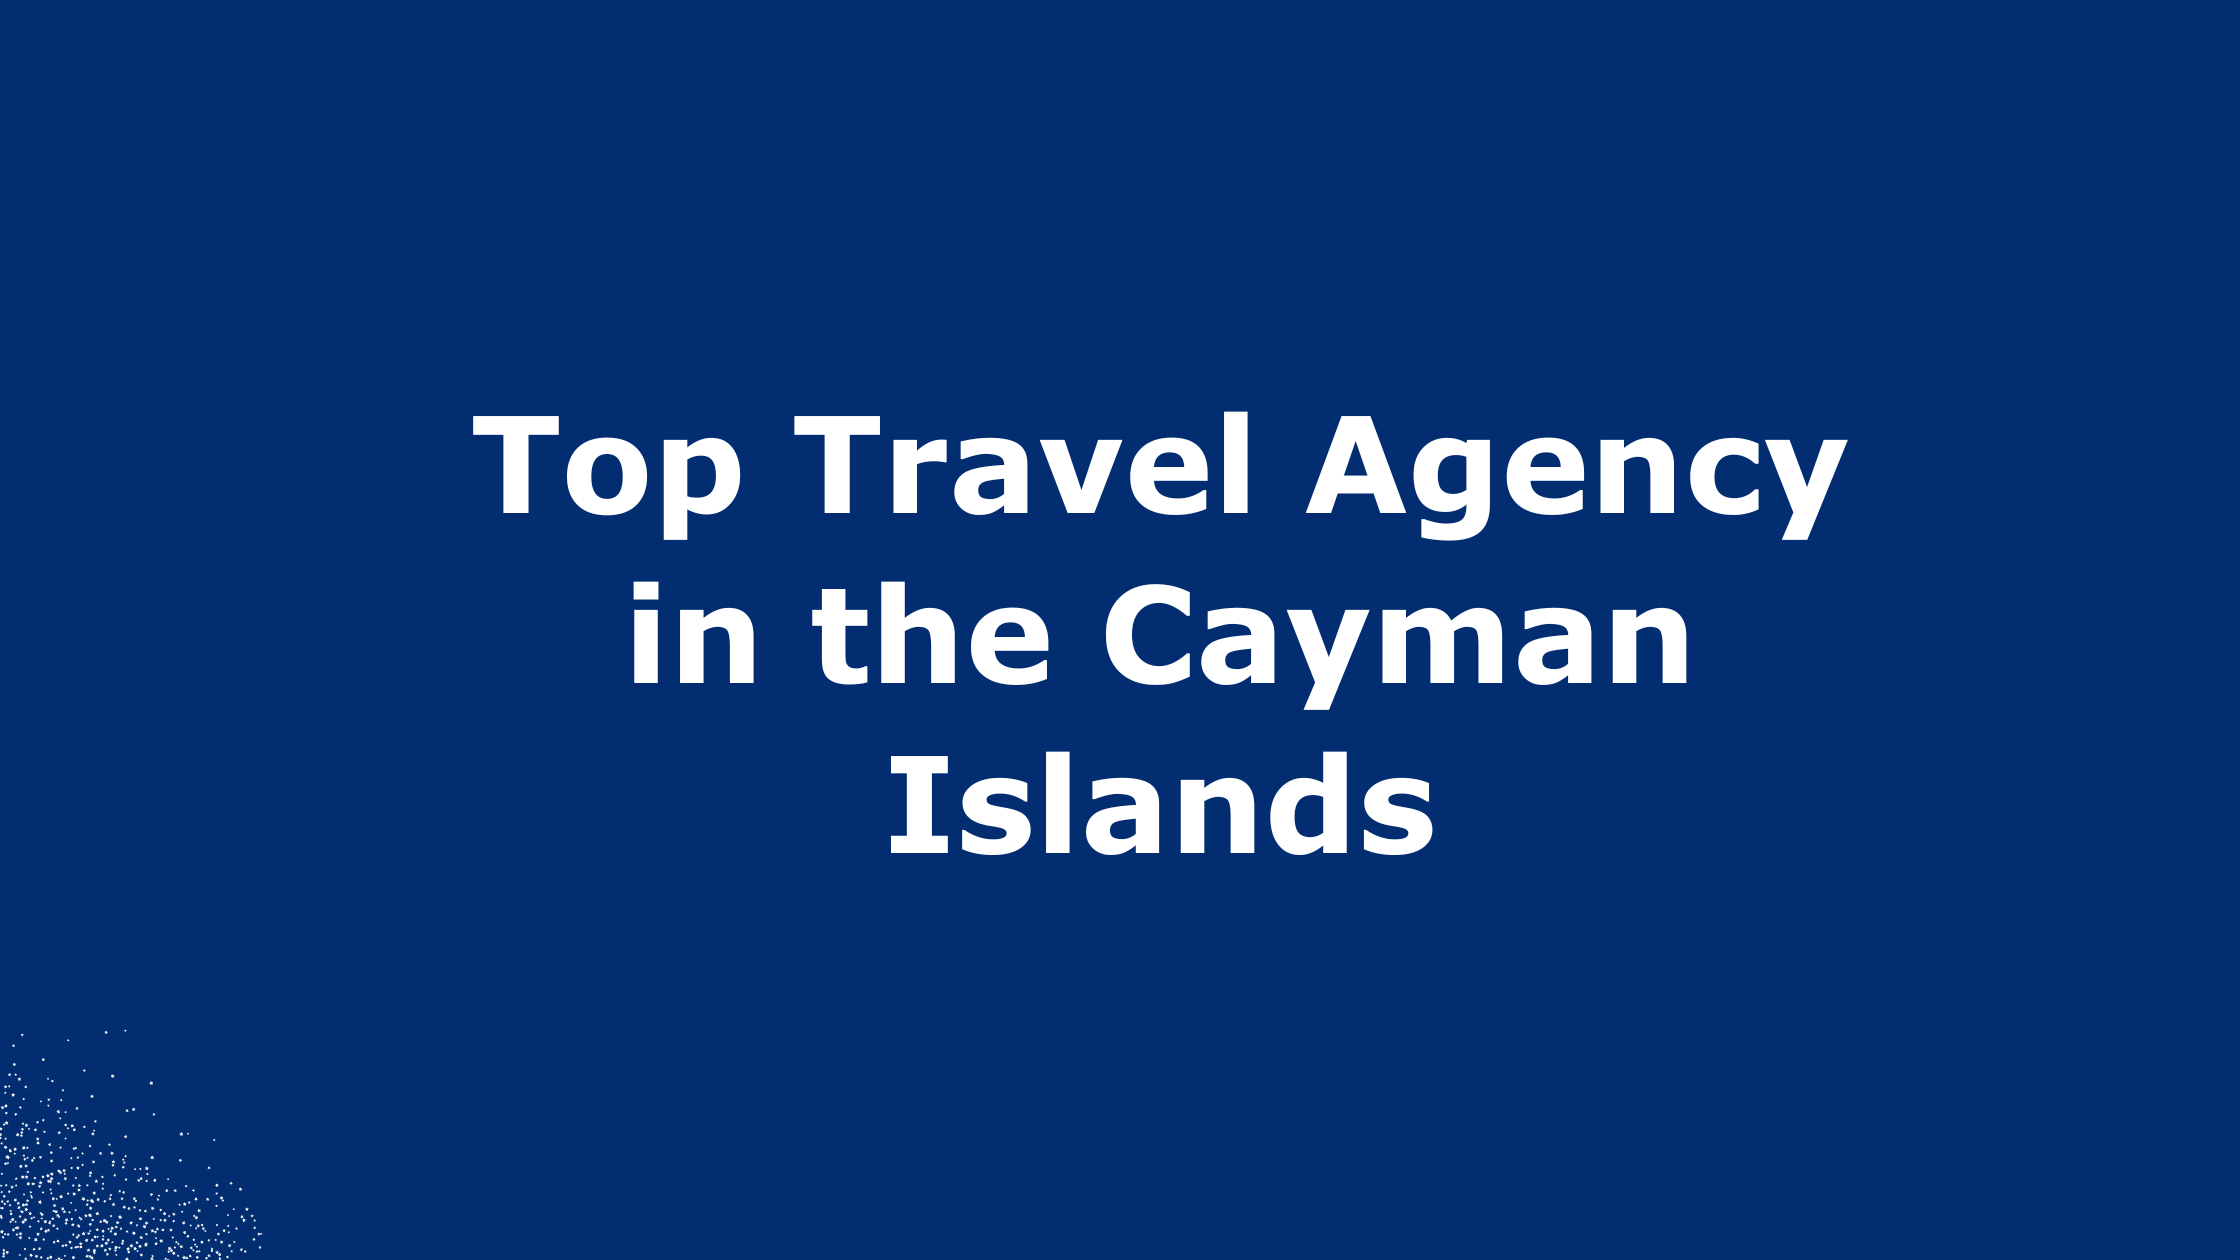 Top Travel Agency in the Cayman Islands